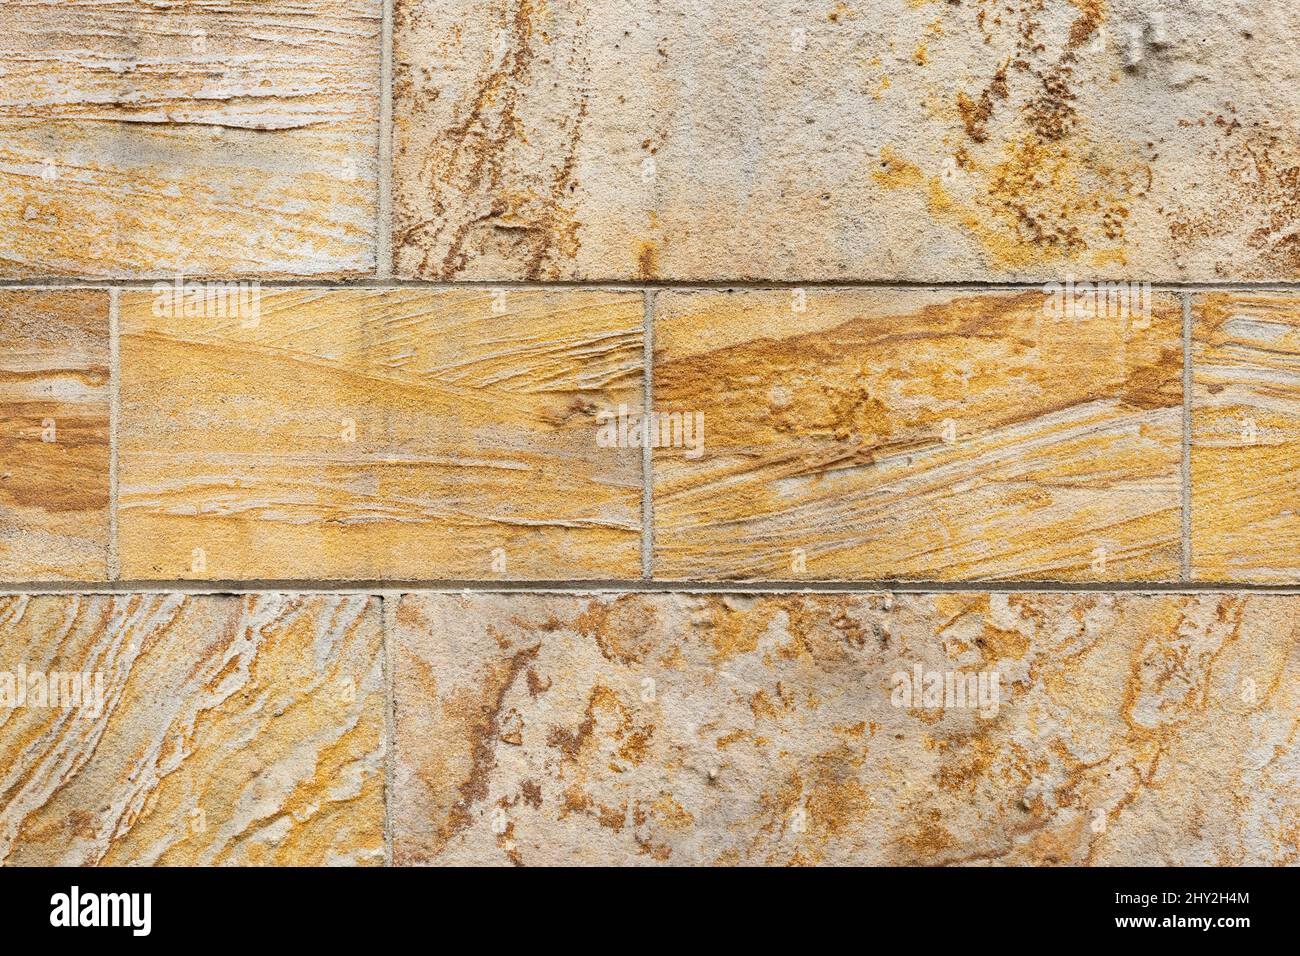 Geologic crossbedding features visible in detail shot of architectural sandstone building blocks on a wall Stock Photo